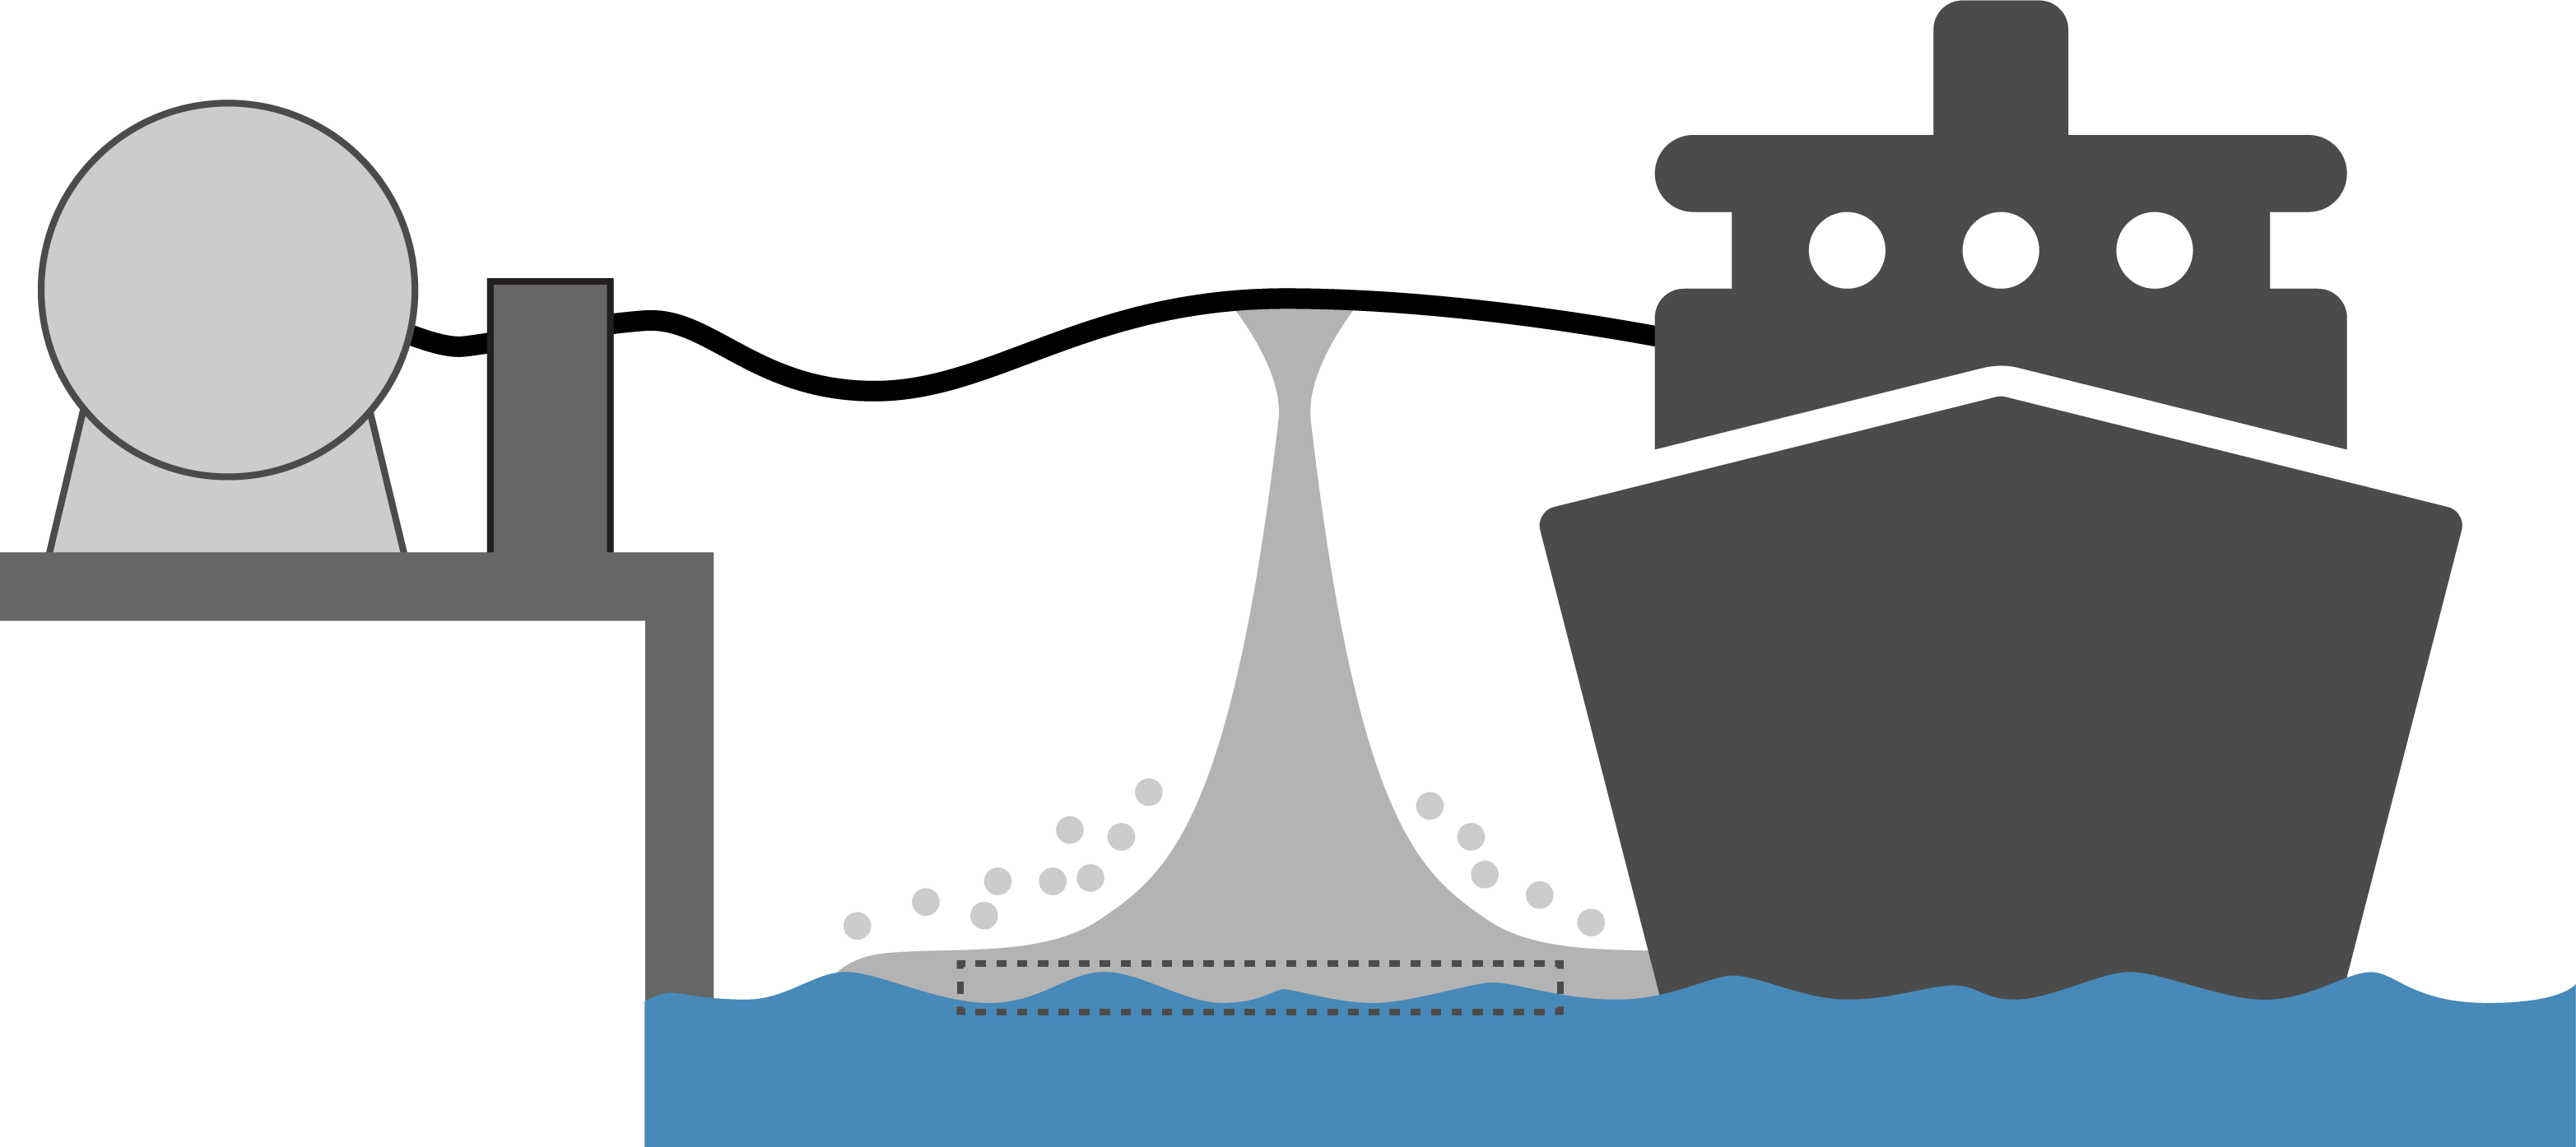 An illustration of a potential ammonia spill when a ship is bunkering ammonia from a port